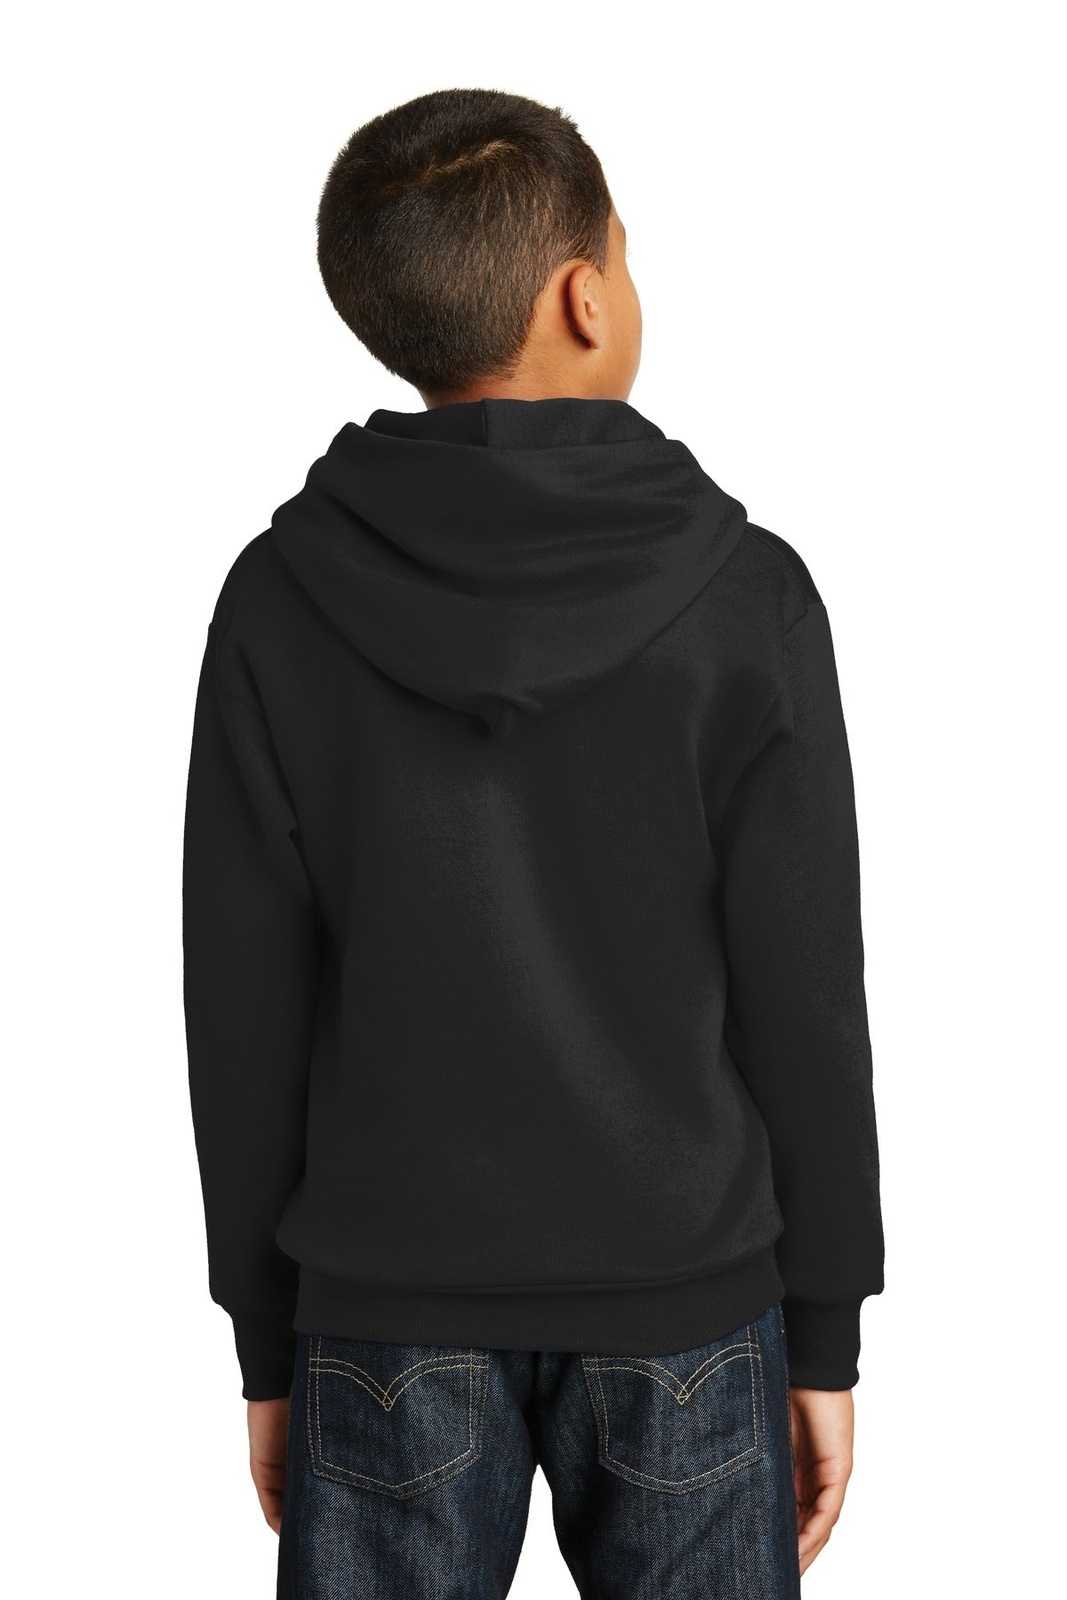 Hanes P470 Youth Ecosmart Pullover Hooded Sweatshirt - Black - HIT a Double - 1